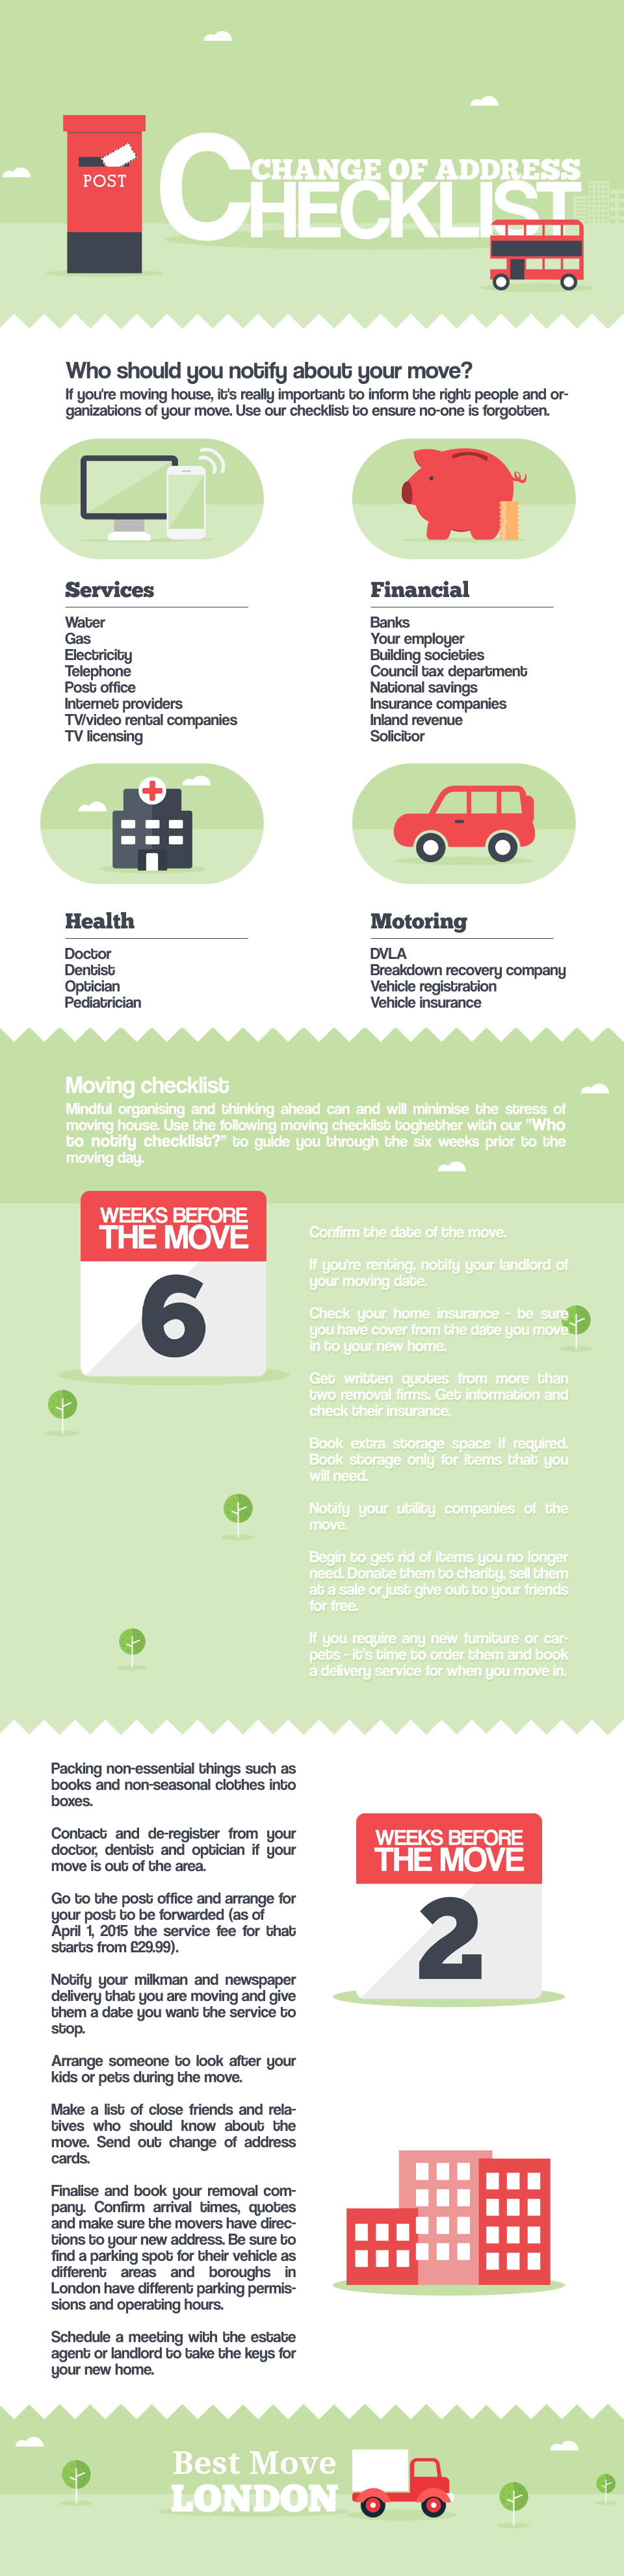 moving-checklist-infographic